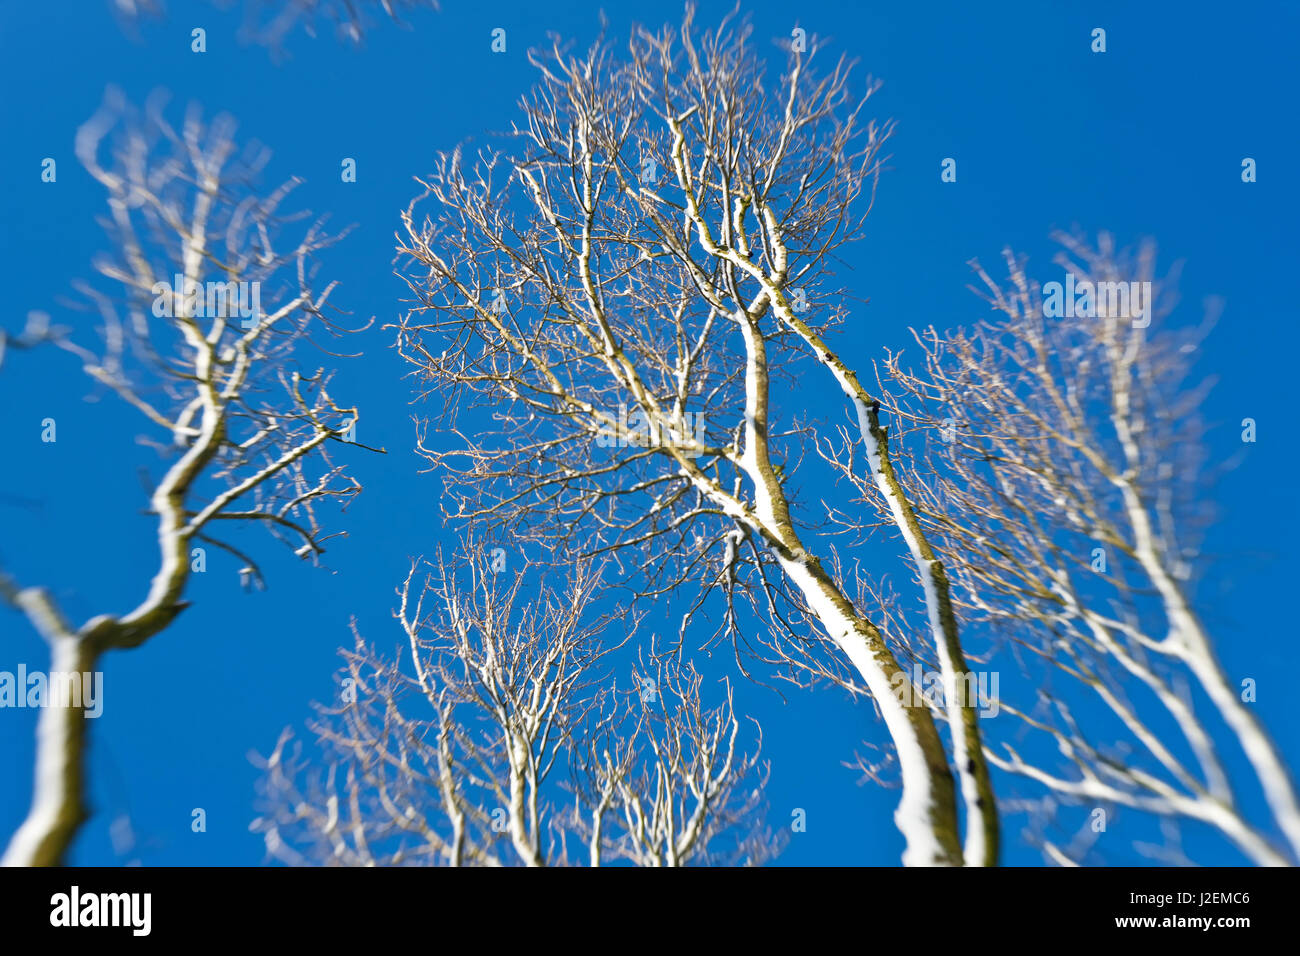 Snow covered trees near Chipping Sodbury, South Gloucestershire, England, UK Stock Photo